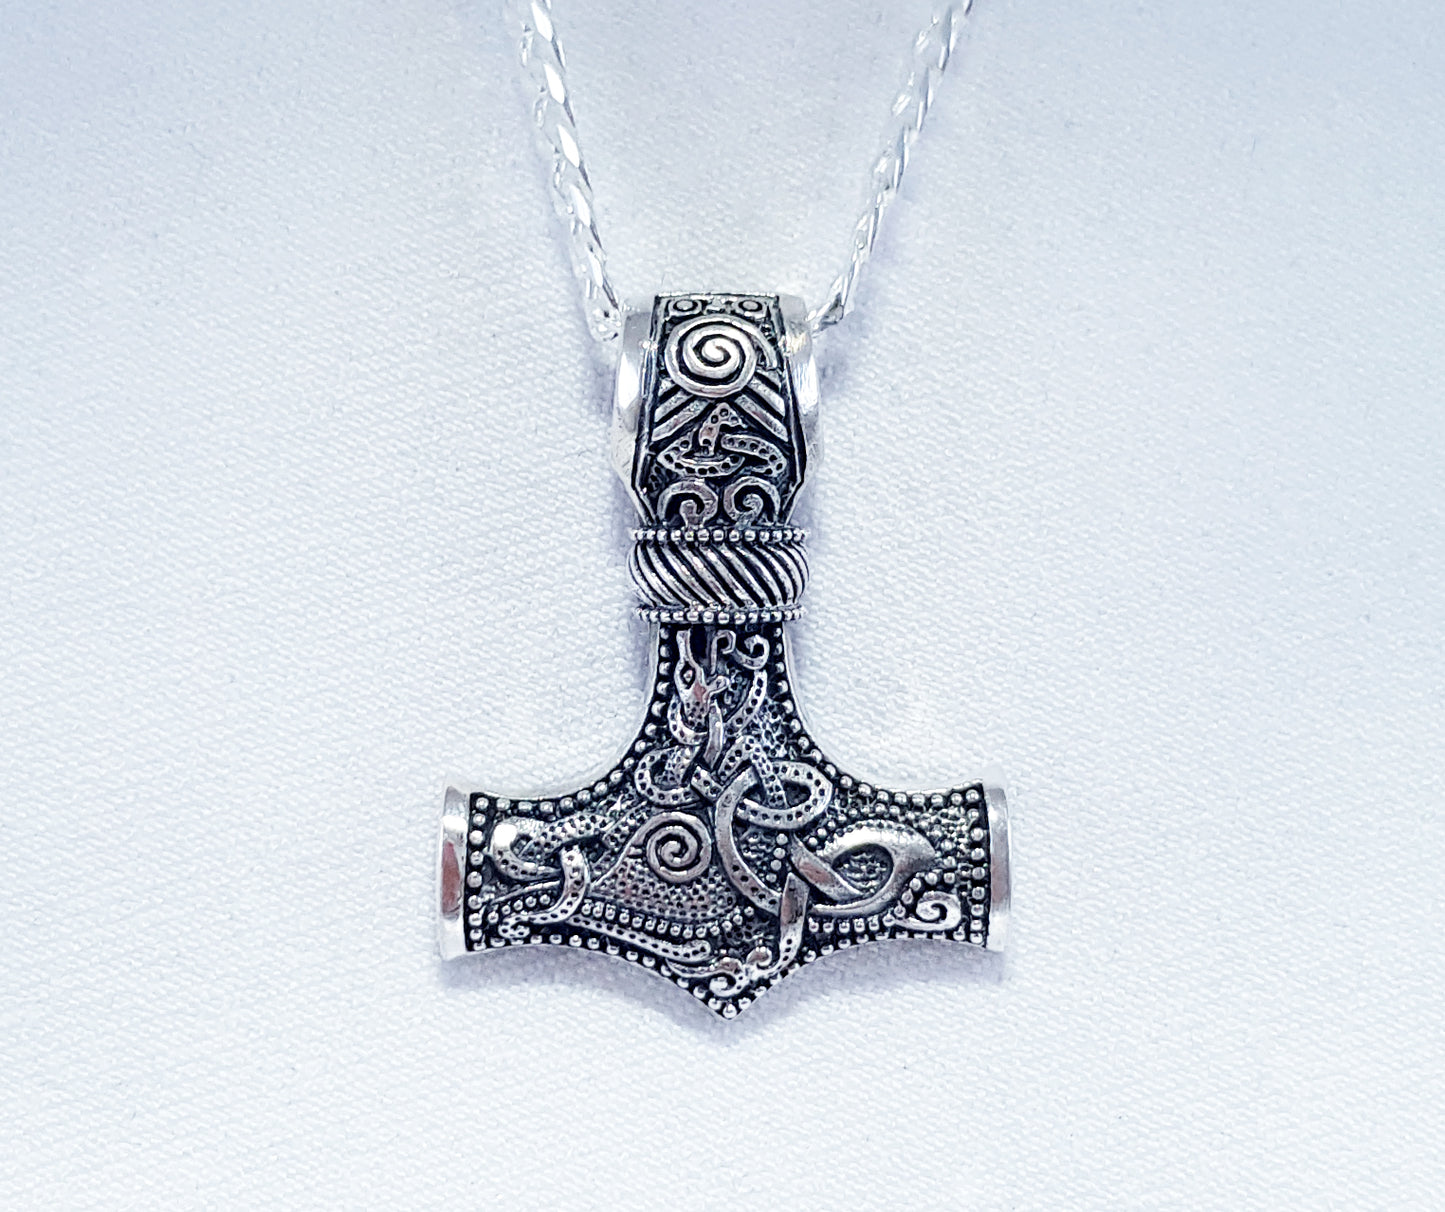 The Hammer Pendant crafted from Sterling Silver